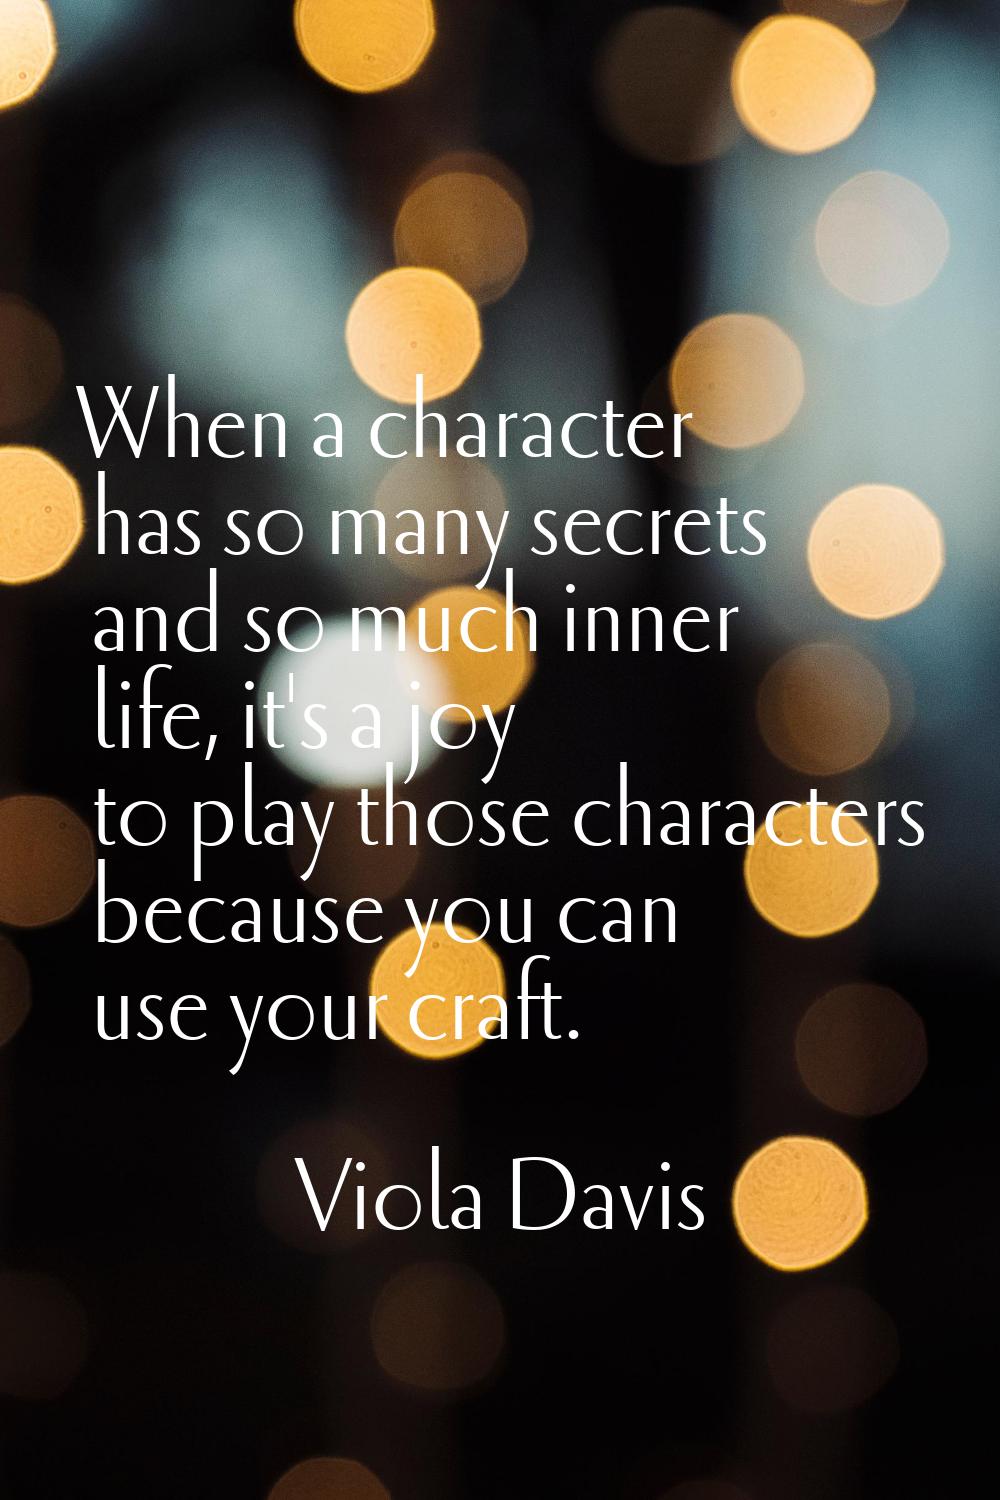 When a character has so many secrets and so much inner life, it's a joy to play those characters be